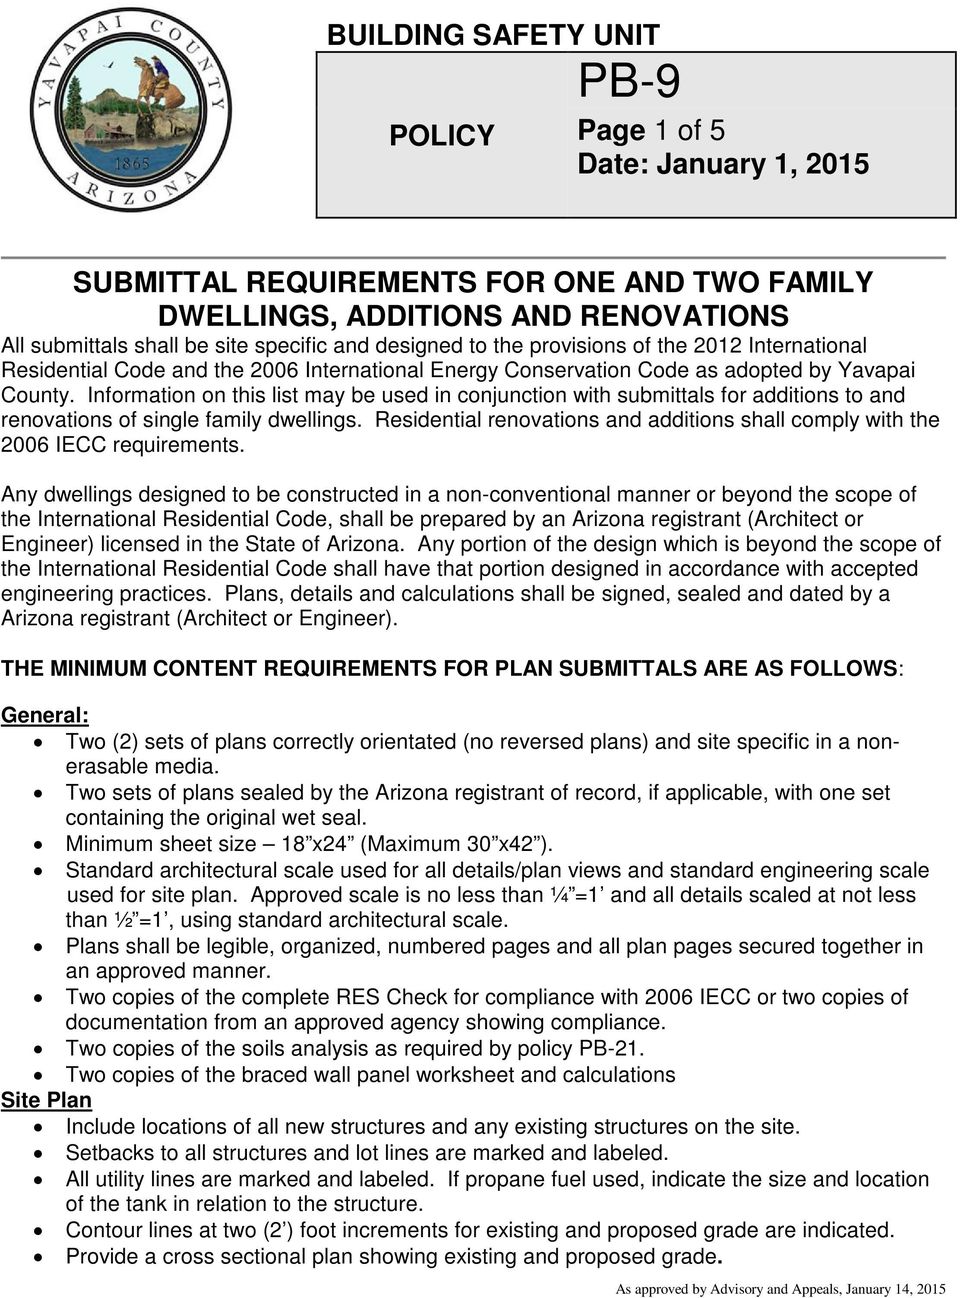 Information on this list may be used in conjunction with submittals for additions to and renovations of single family dwellings.